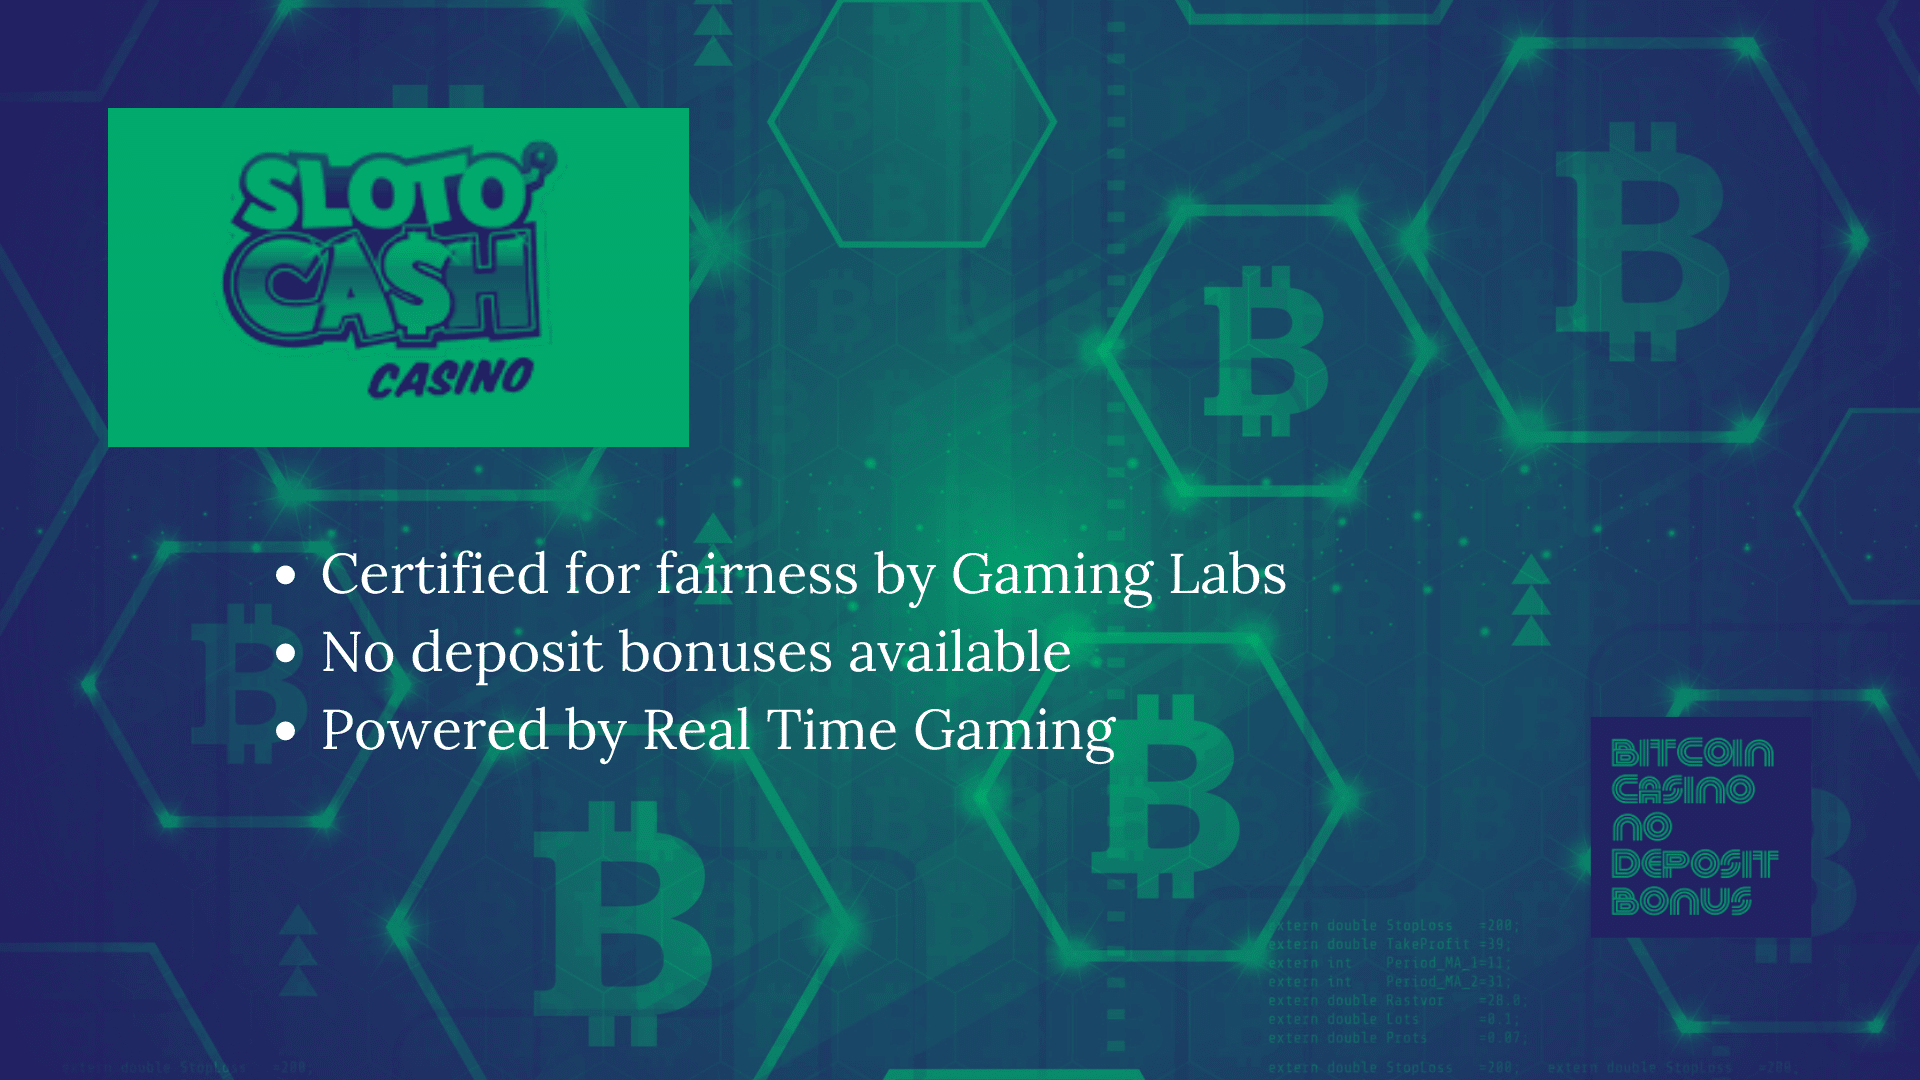 You are currently viewing SlotoCash Casino No Deposit Bonus Codes August 2022